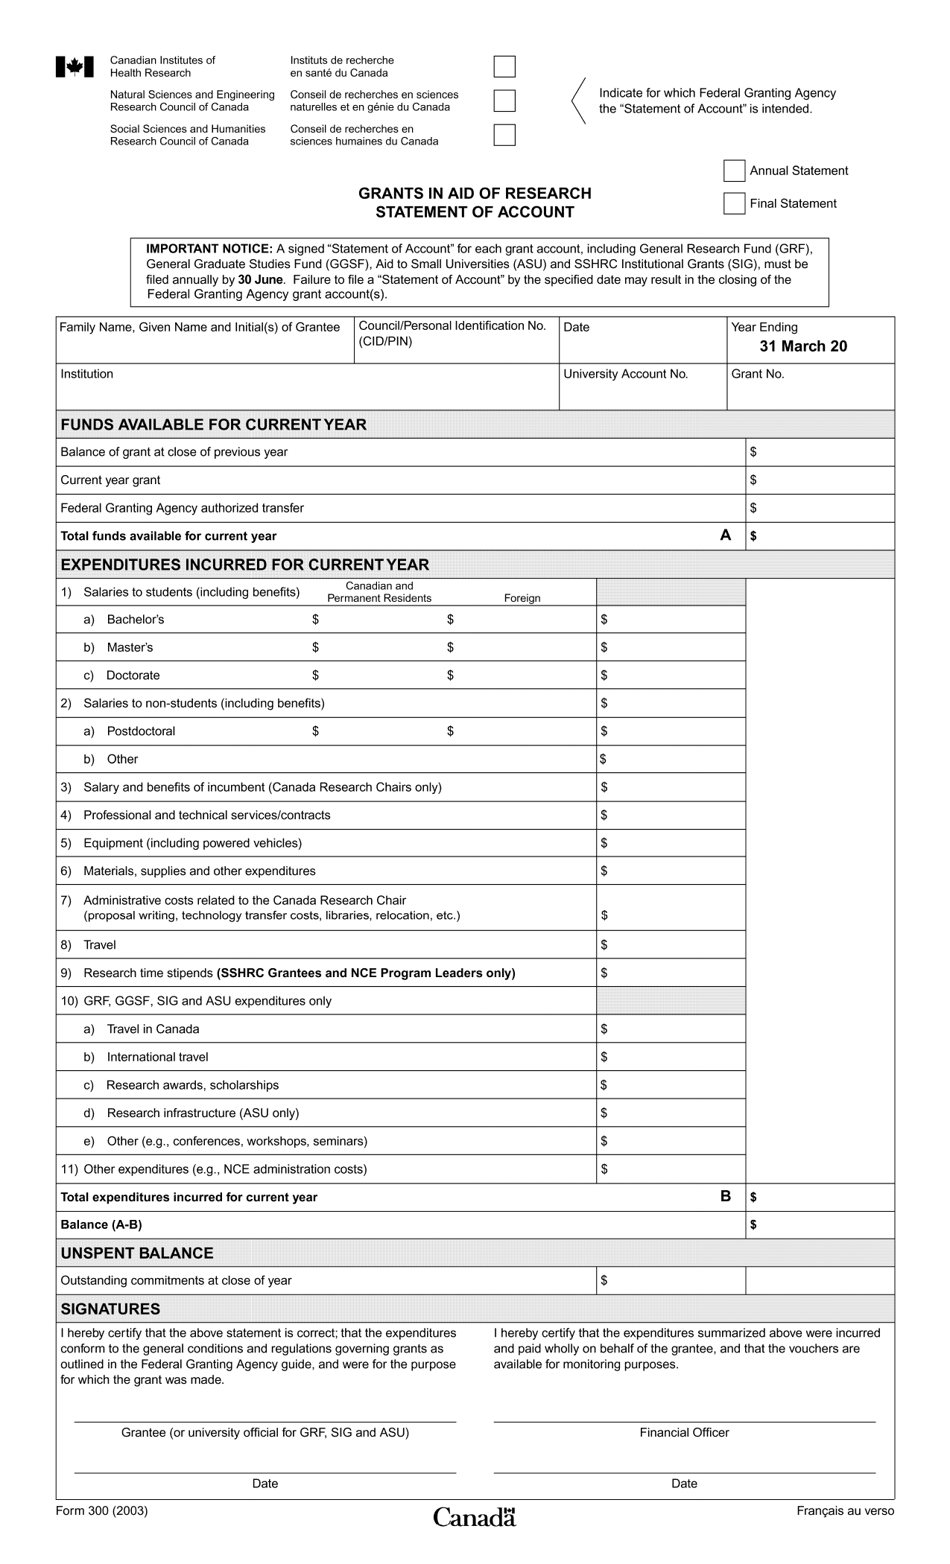 Form 300 Statement of Account - Grants in Aid of Research - Canada, Page 1